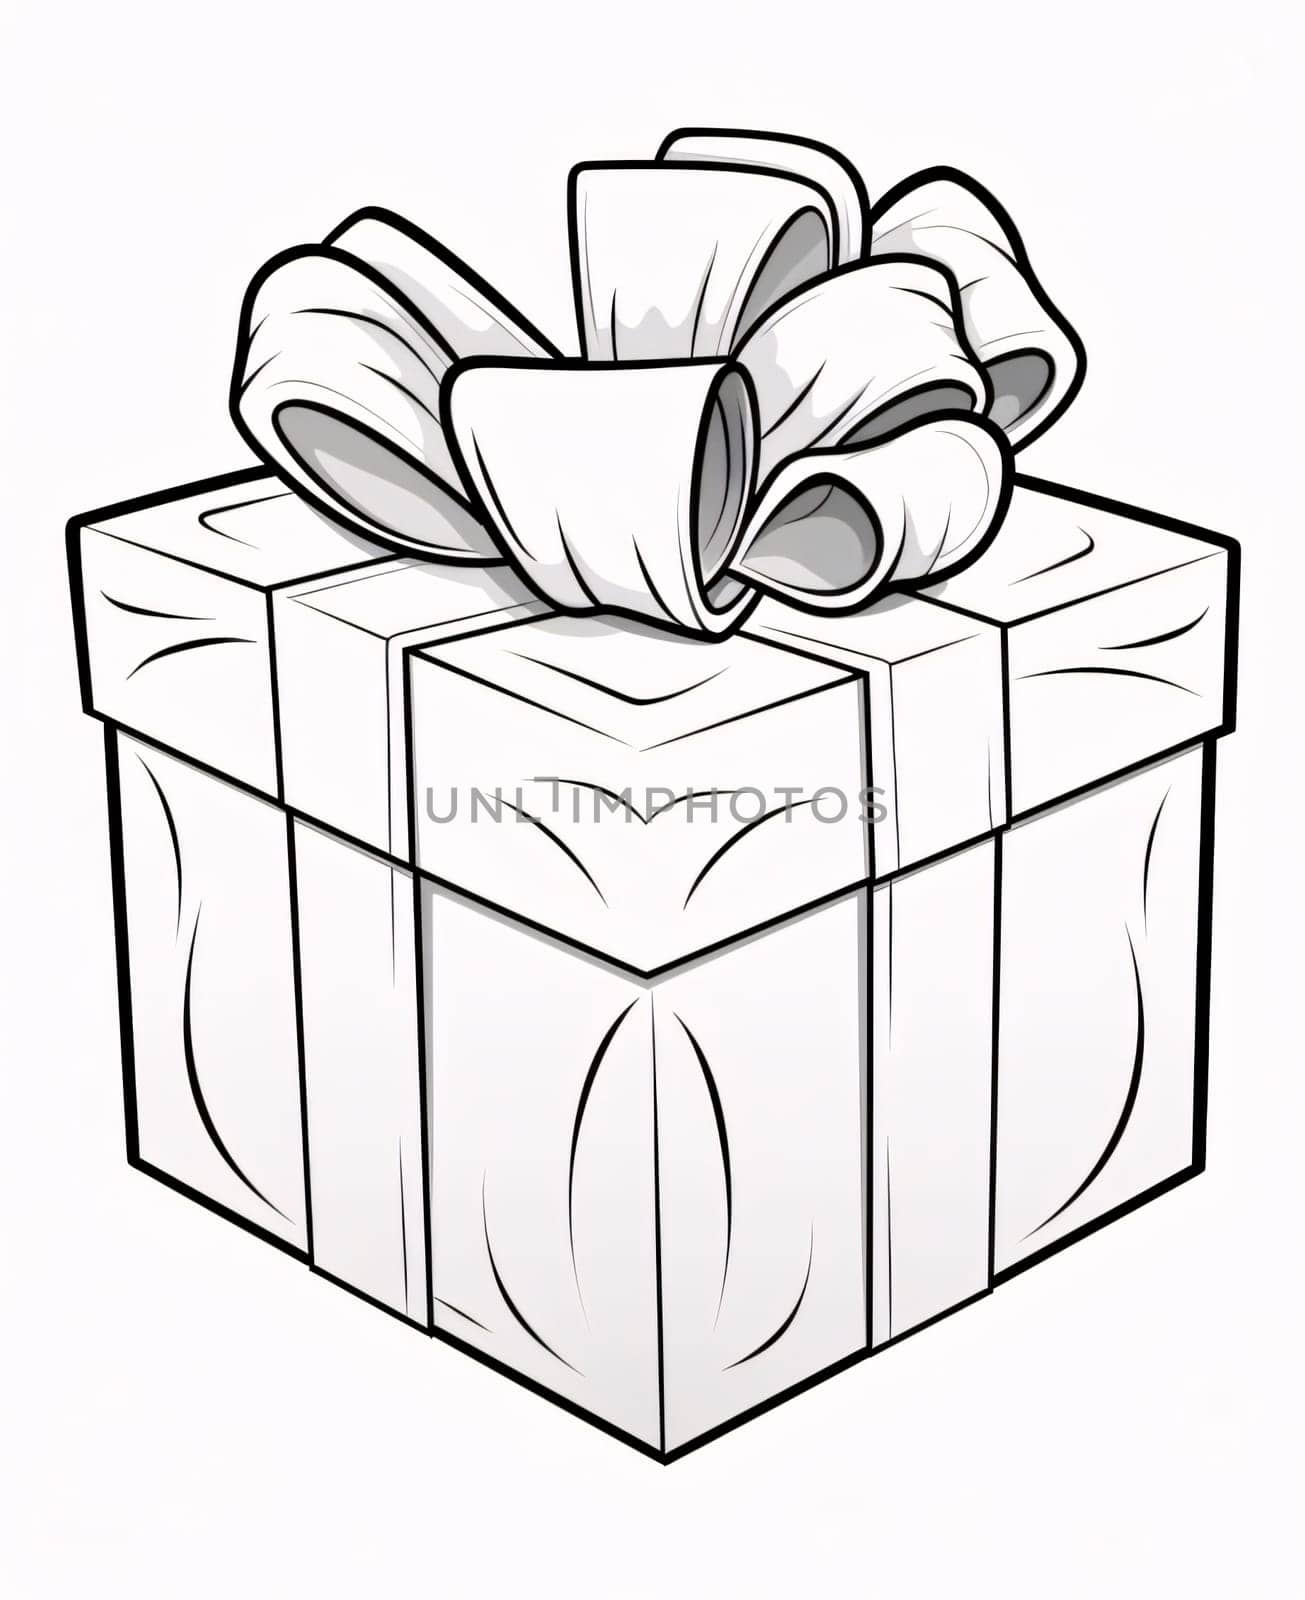 Black and white coloring card, gift, box with a bow. Gifts as a day symbol of present and love. A time of falling in love and love.